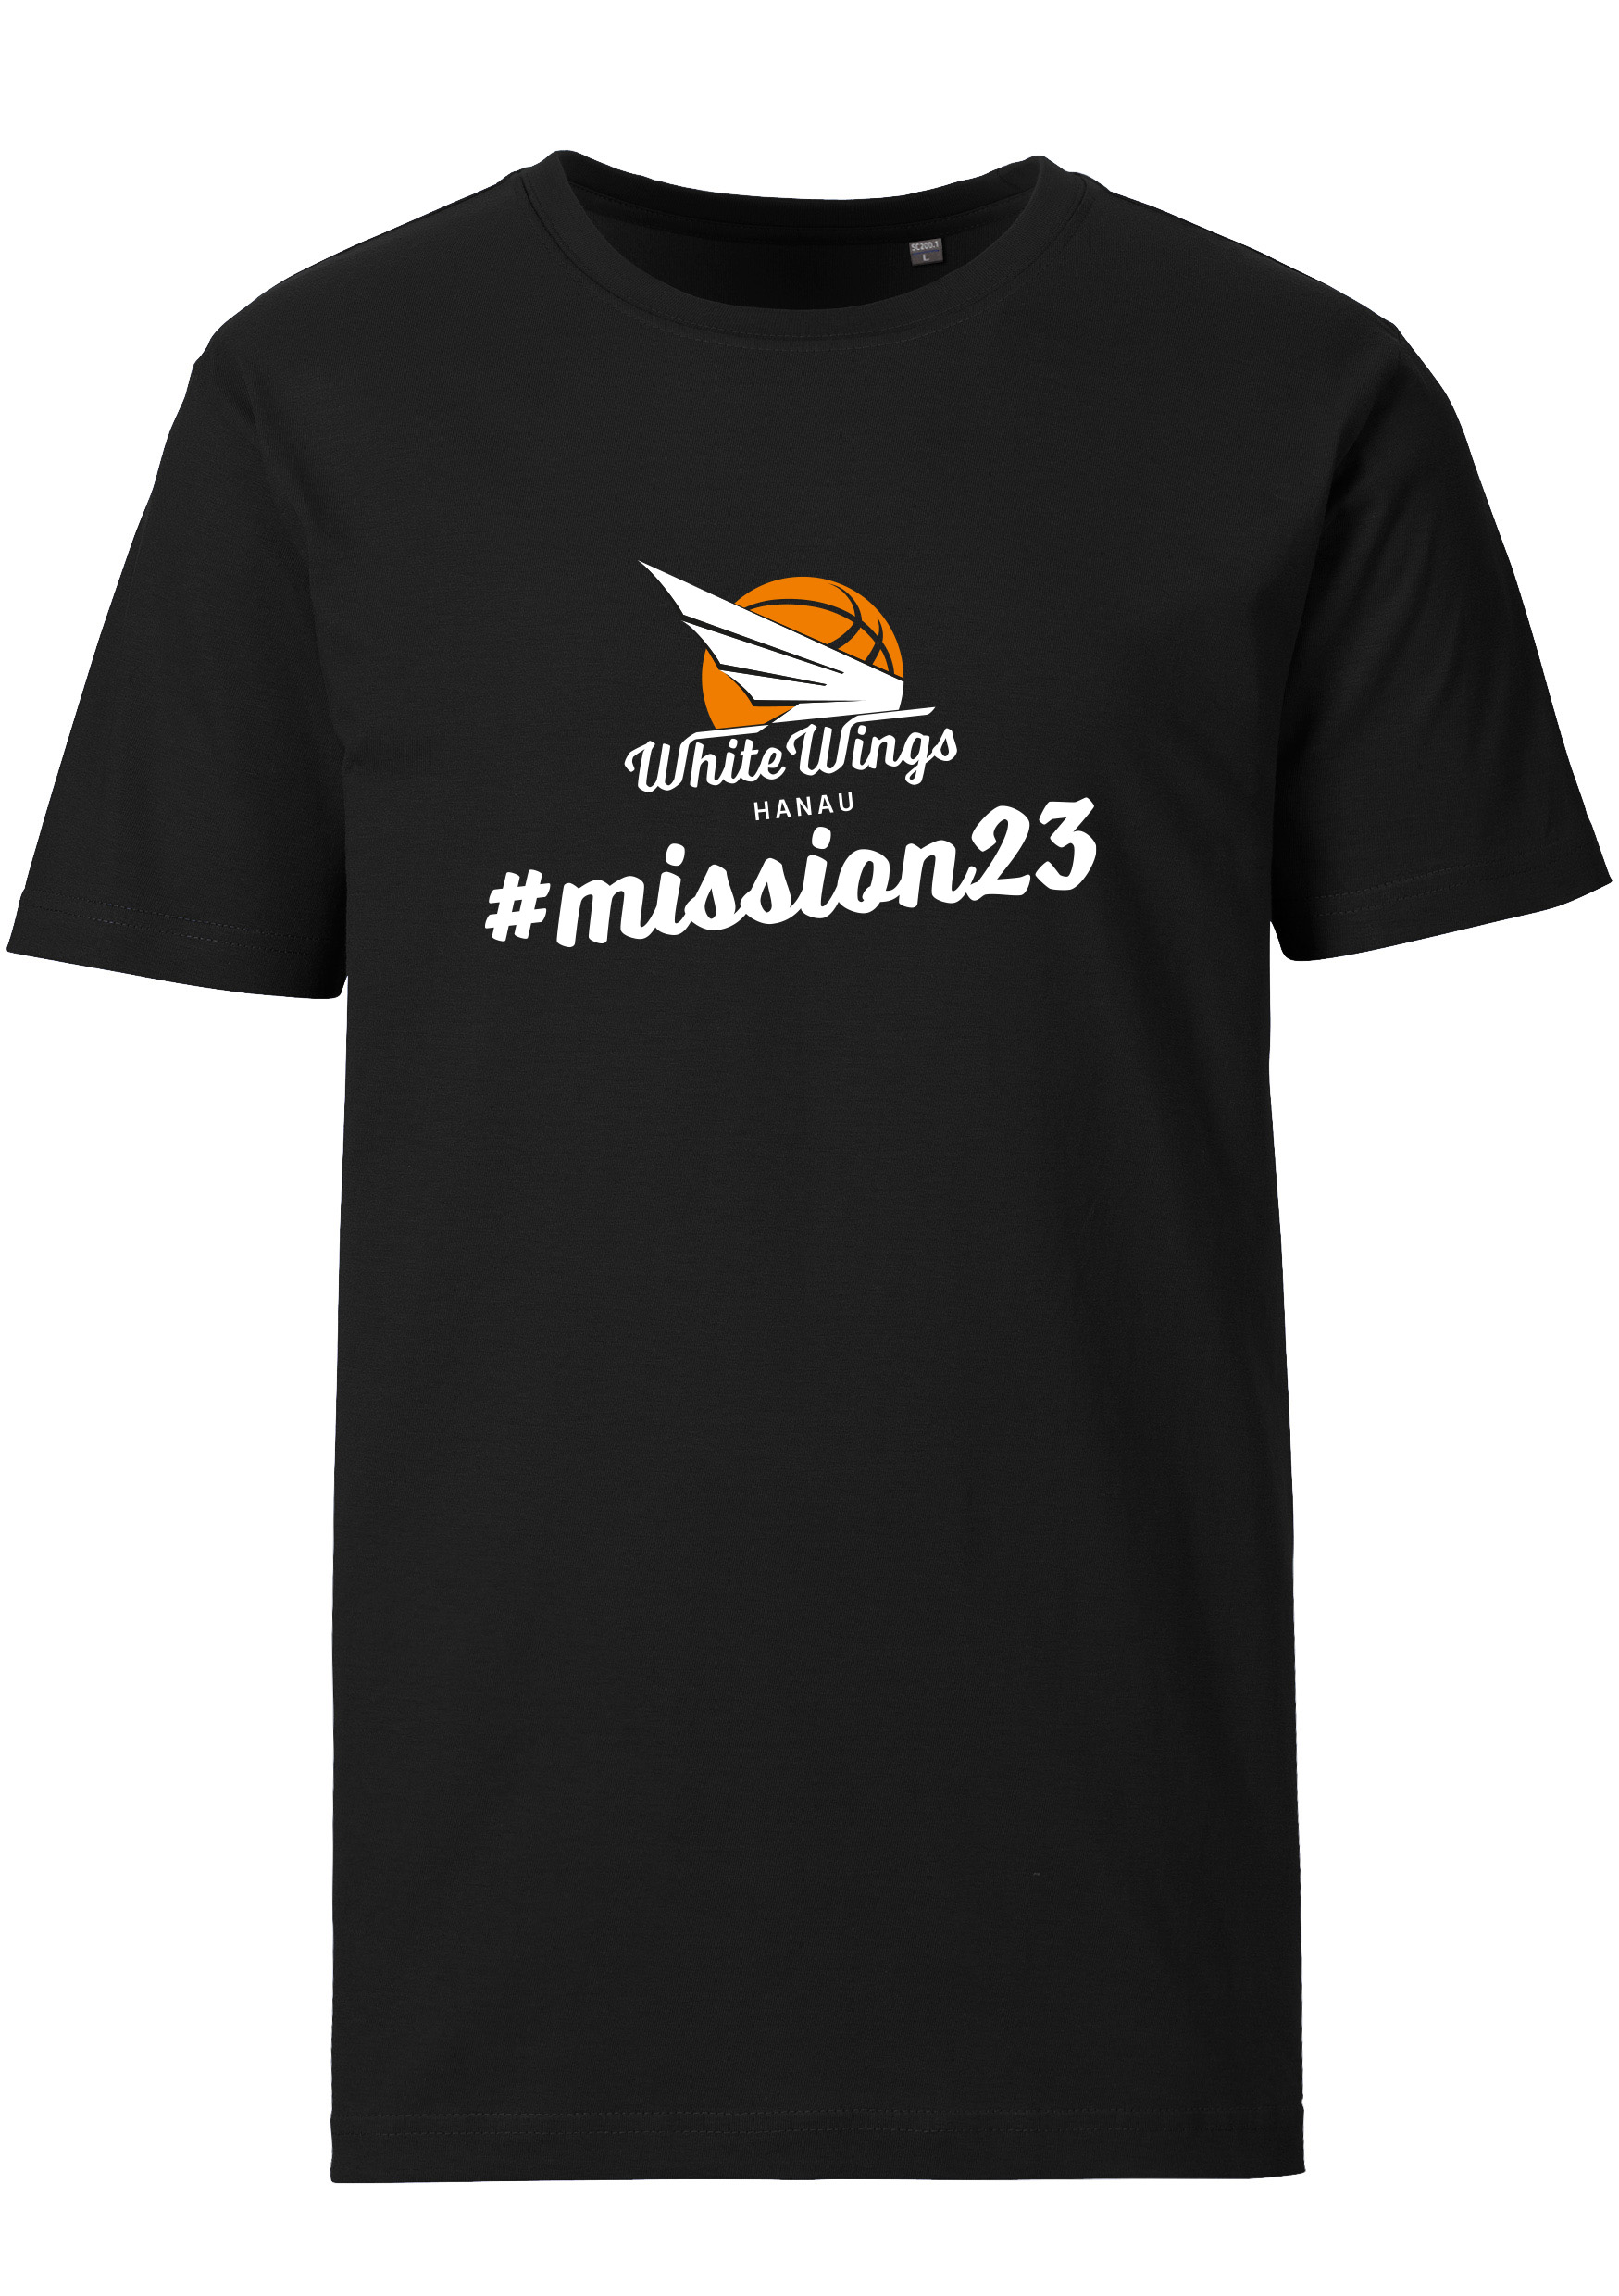 WhiteWings Playoff-T-Shirt 2022